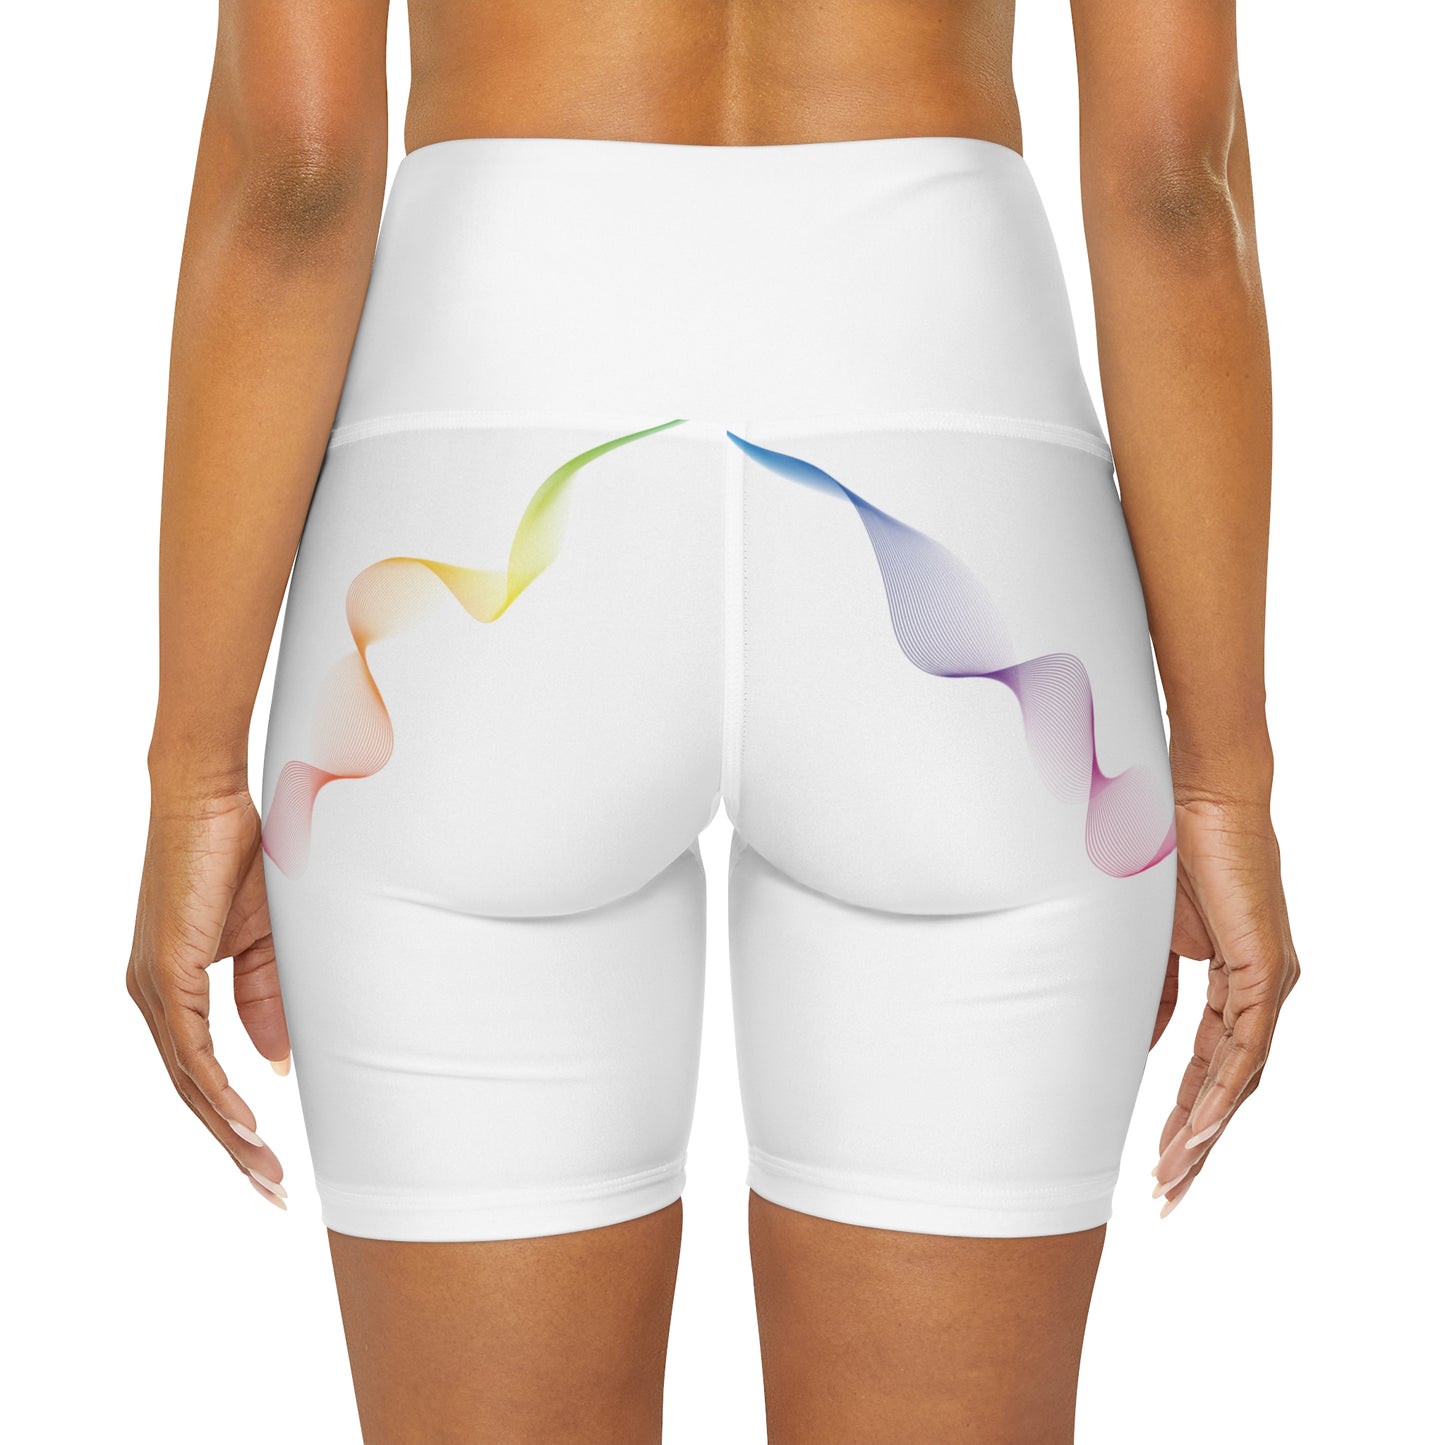 417 Hz Frequency Yoga Shorts